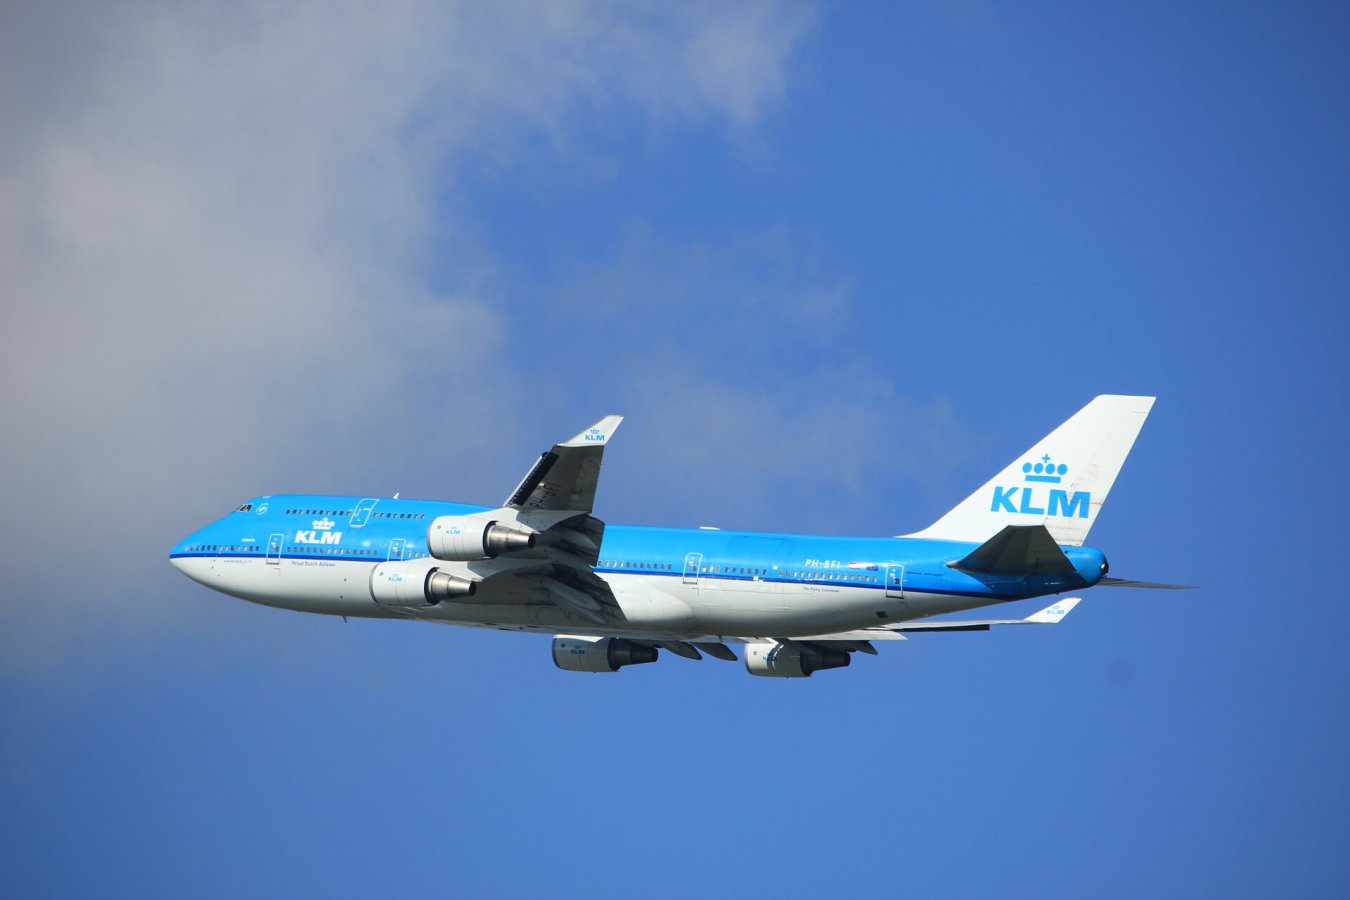 Dutch airline KLM sued over 'greenwashing'